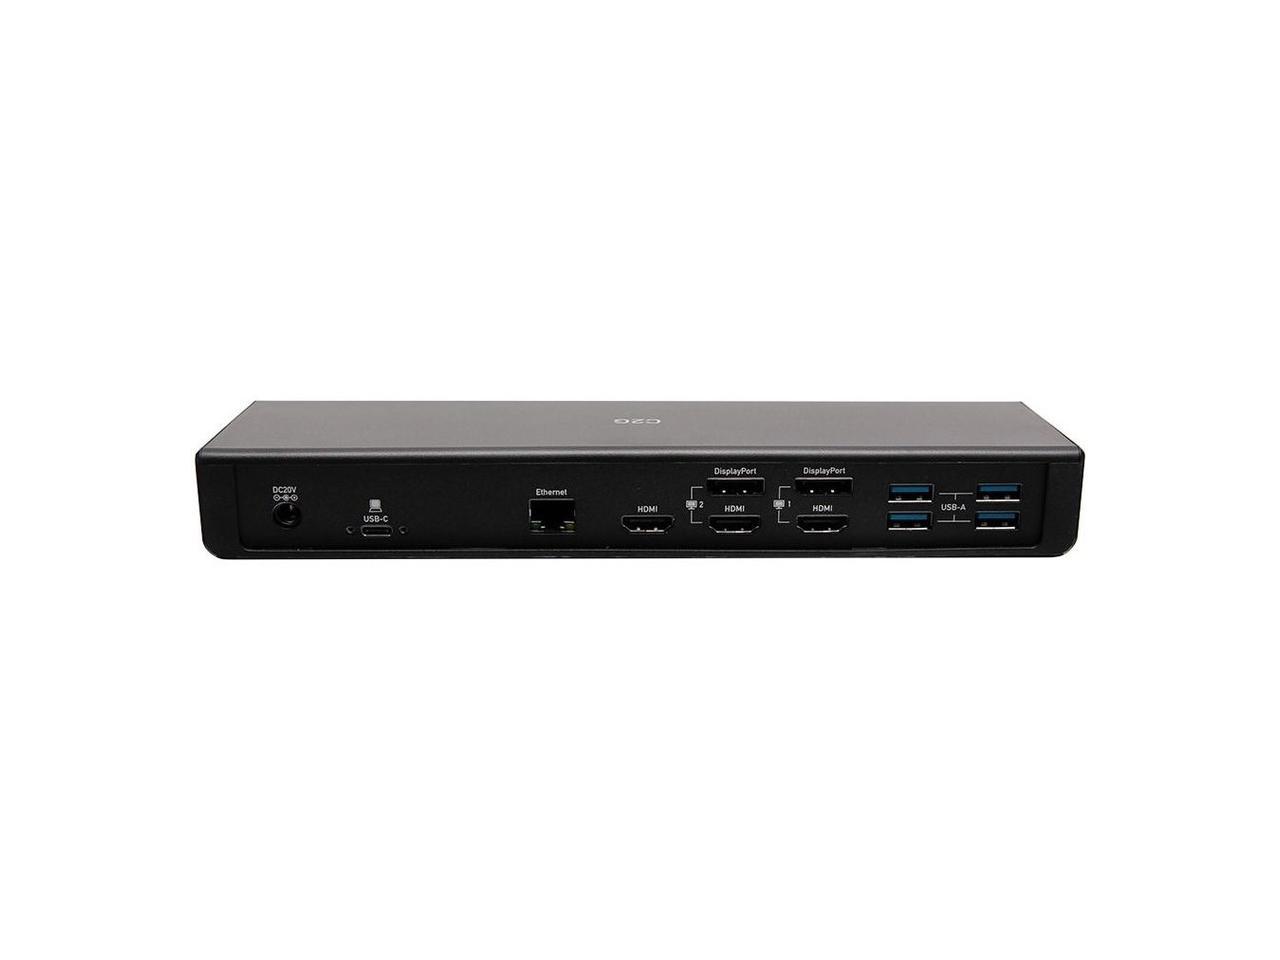 C2G Black C2G54535 USB-C 14-in-1 Triple Display Docking Station with HDMI, DisplayPort, Ethernet, USB, 3.5mm Audio and Power Delivery up to 85W - 4K 30Hz (TAA Compliant)